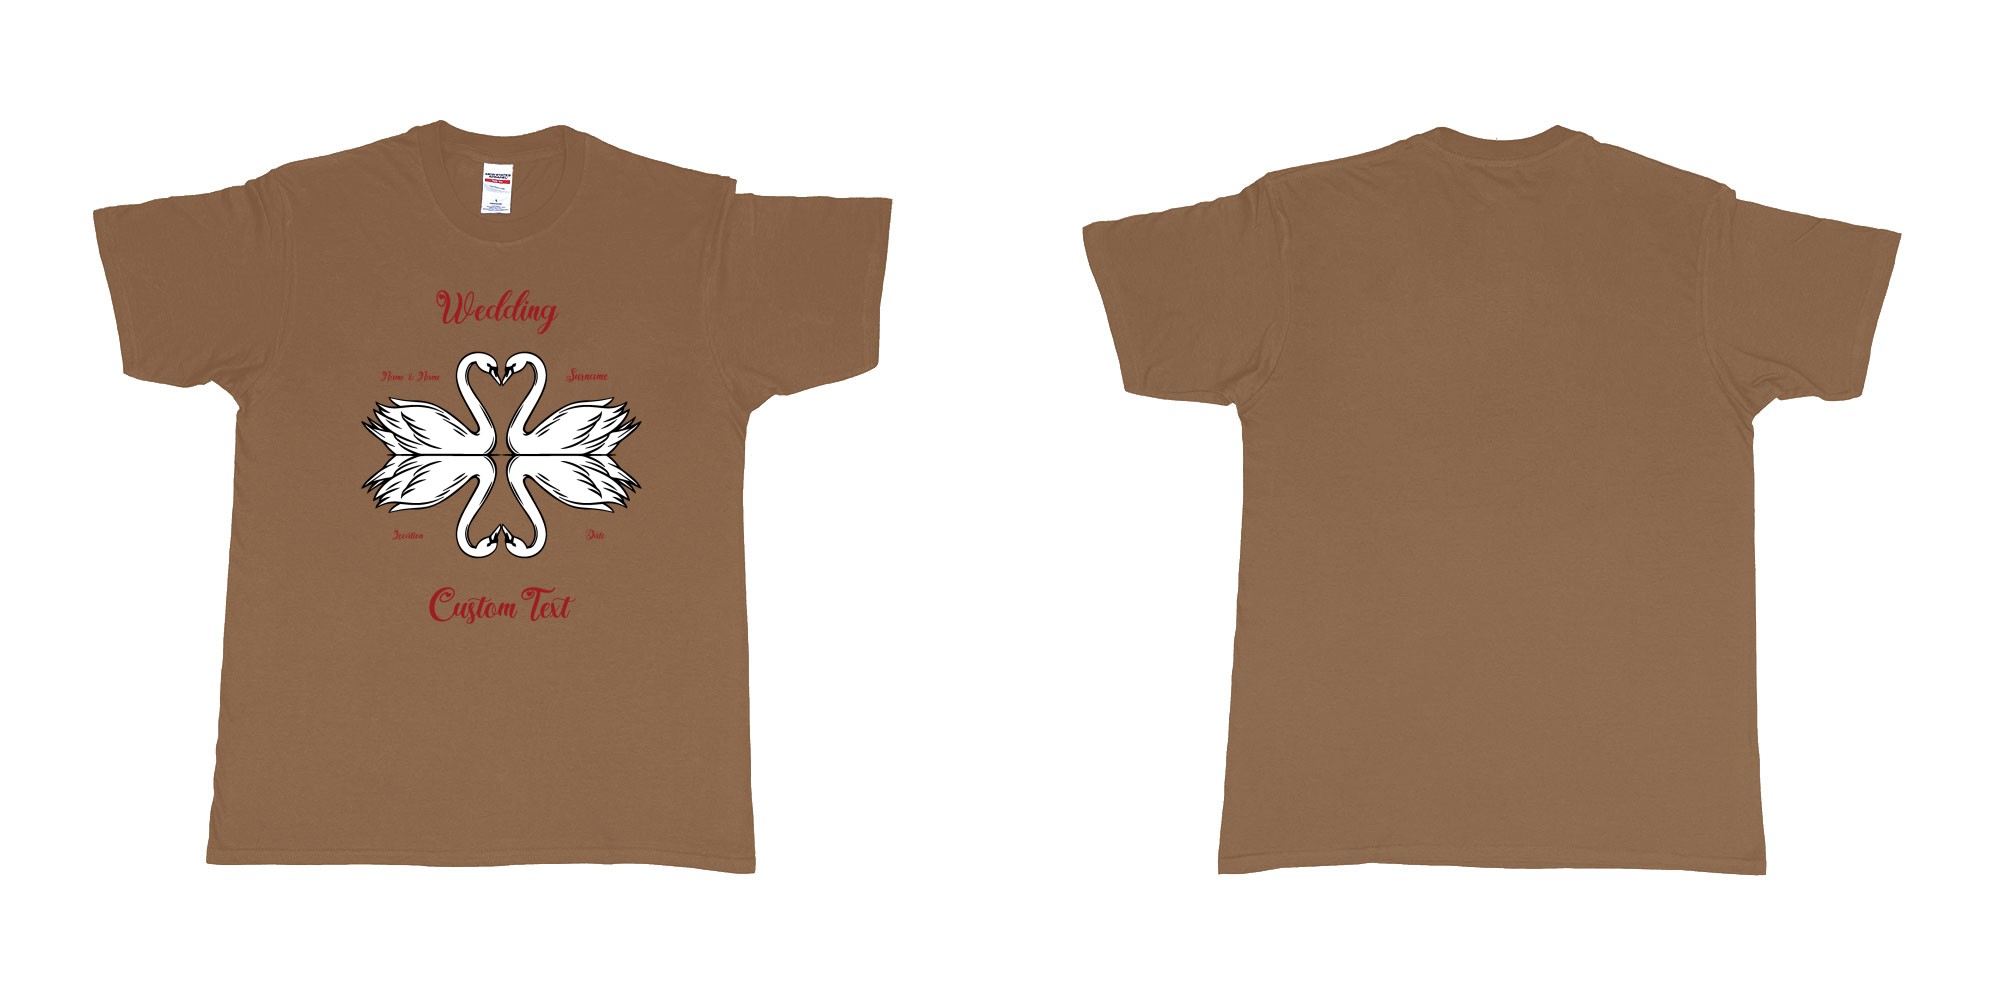 Custom tshirt design swans hearts reflection in fabric color chestnut choice your own text made in Bali by The Pirate Way